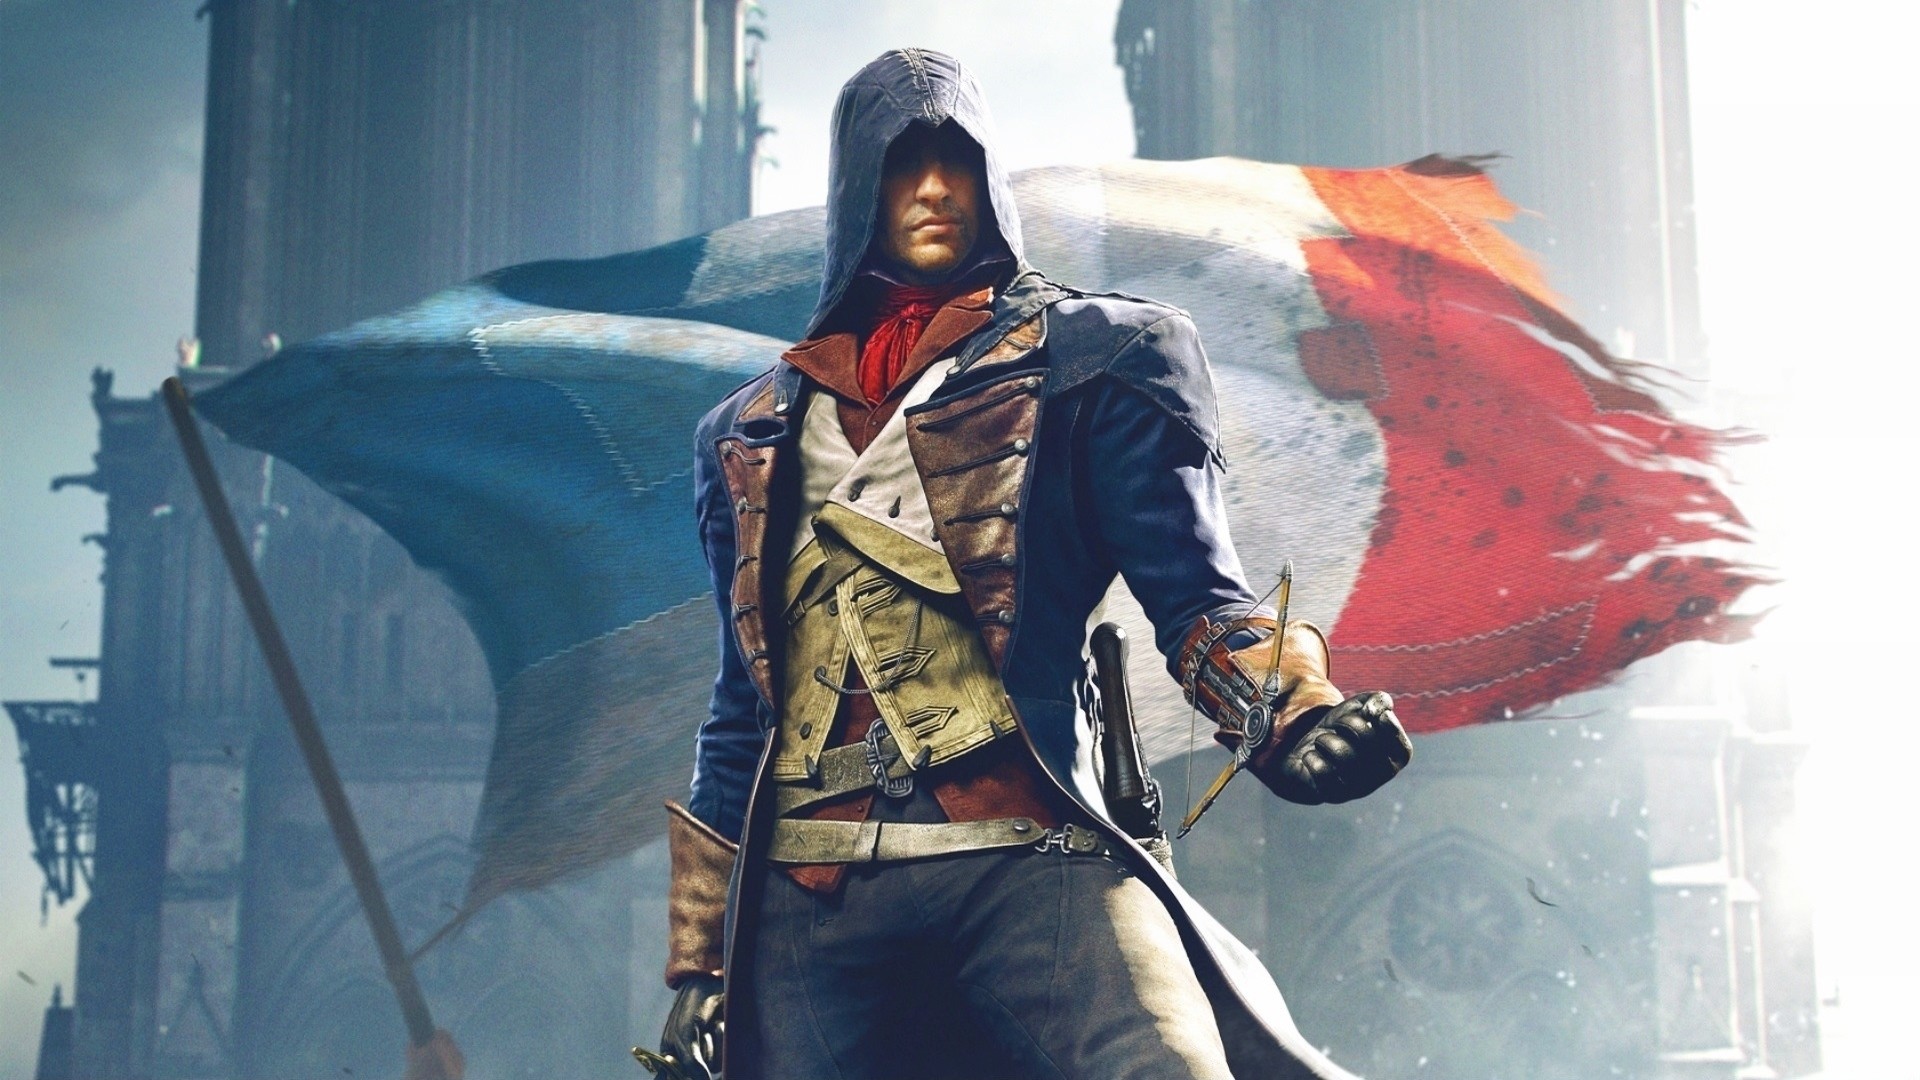 1920x1080 Assassins Creed Franchise images Assassins Creed Unity HD wallpaper and  background photos